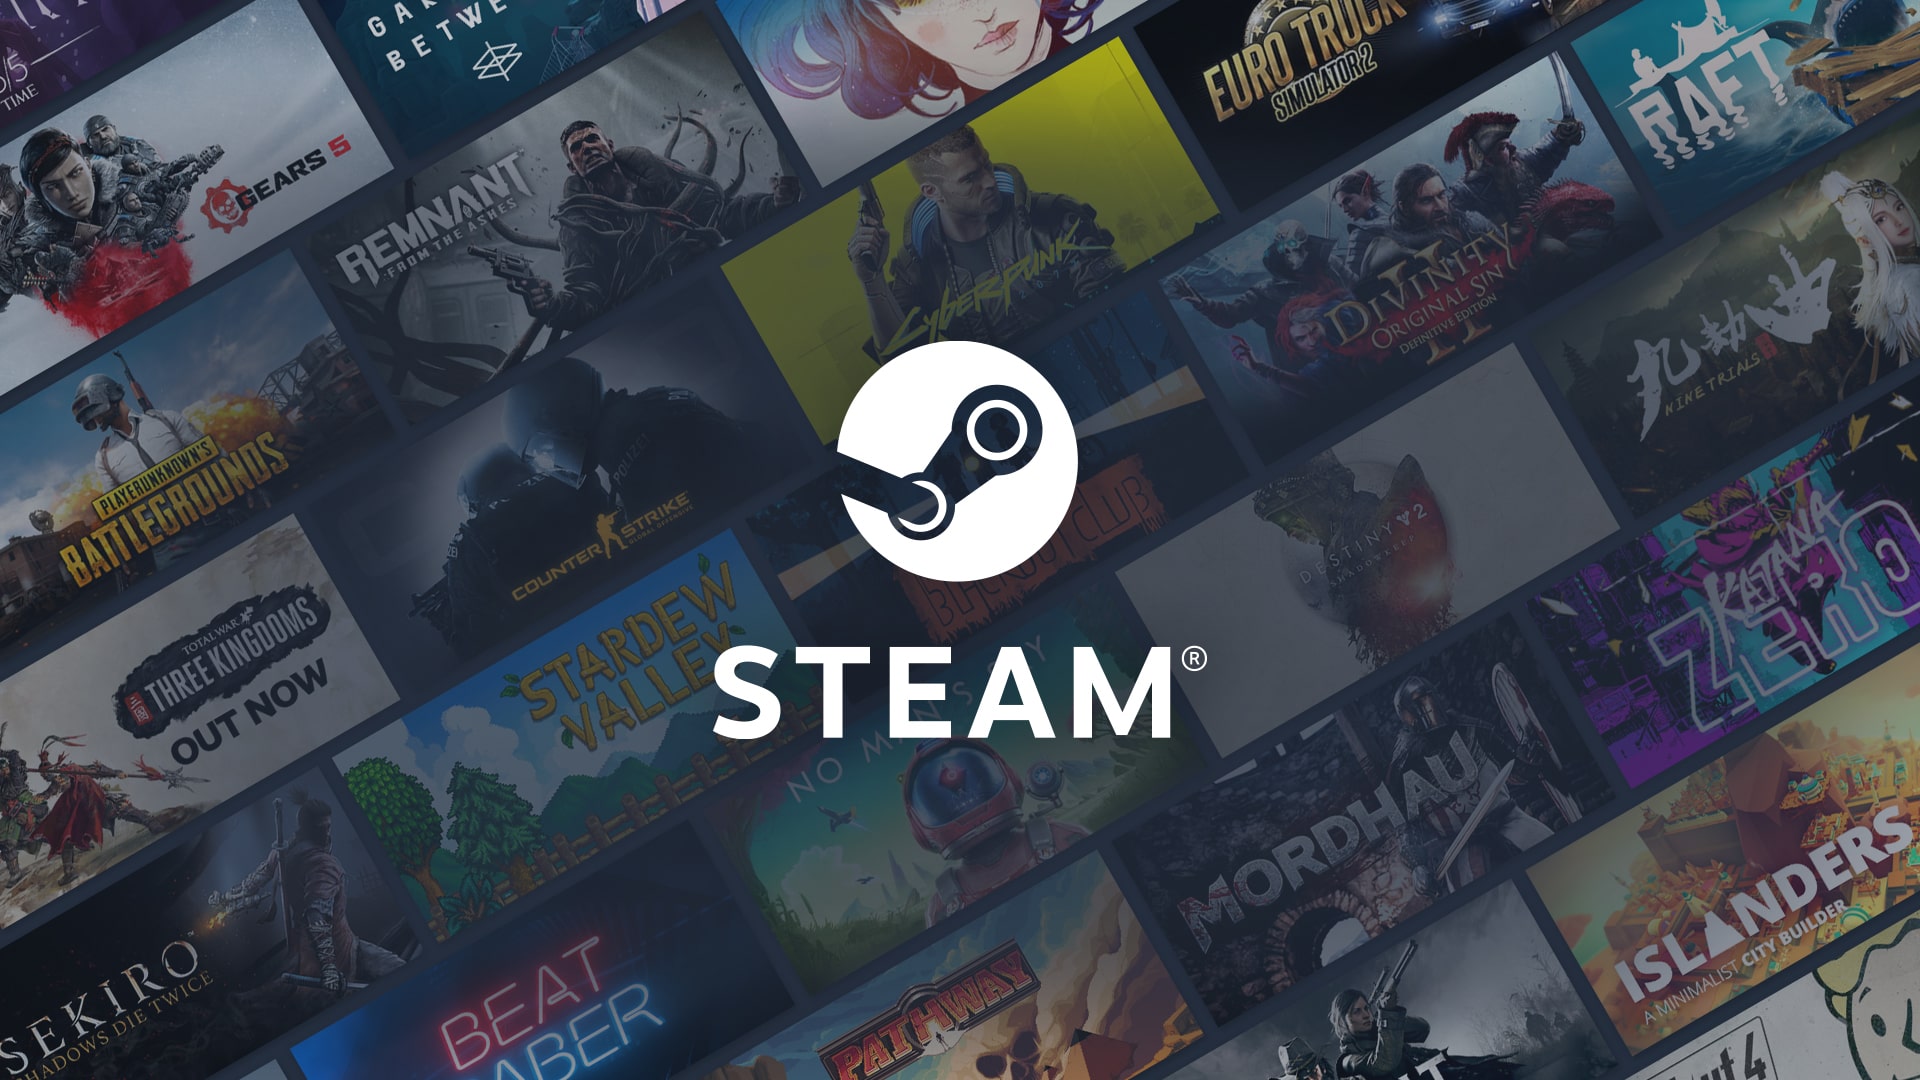 Steam store cover and logo